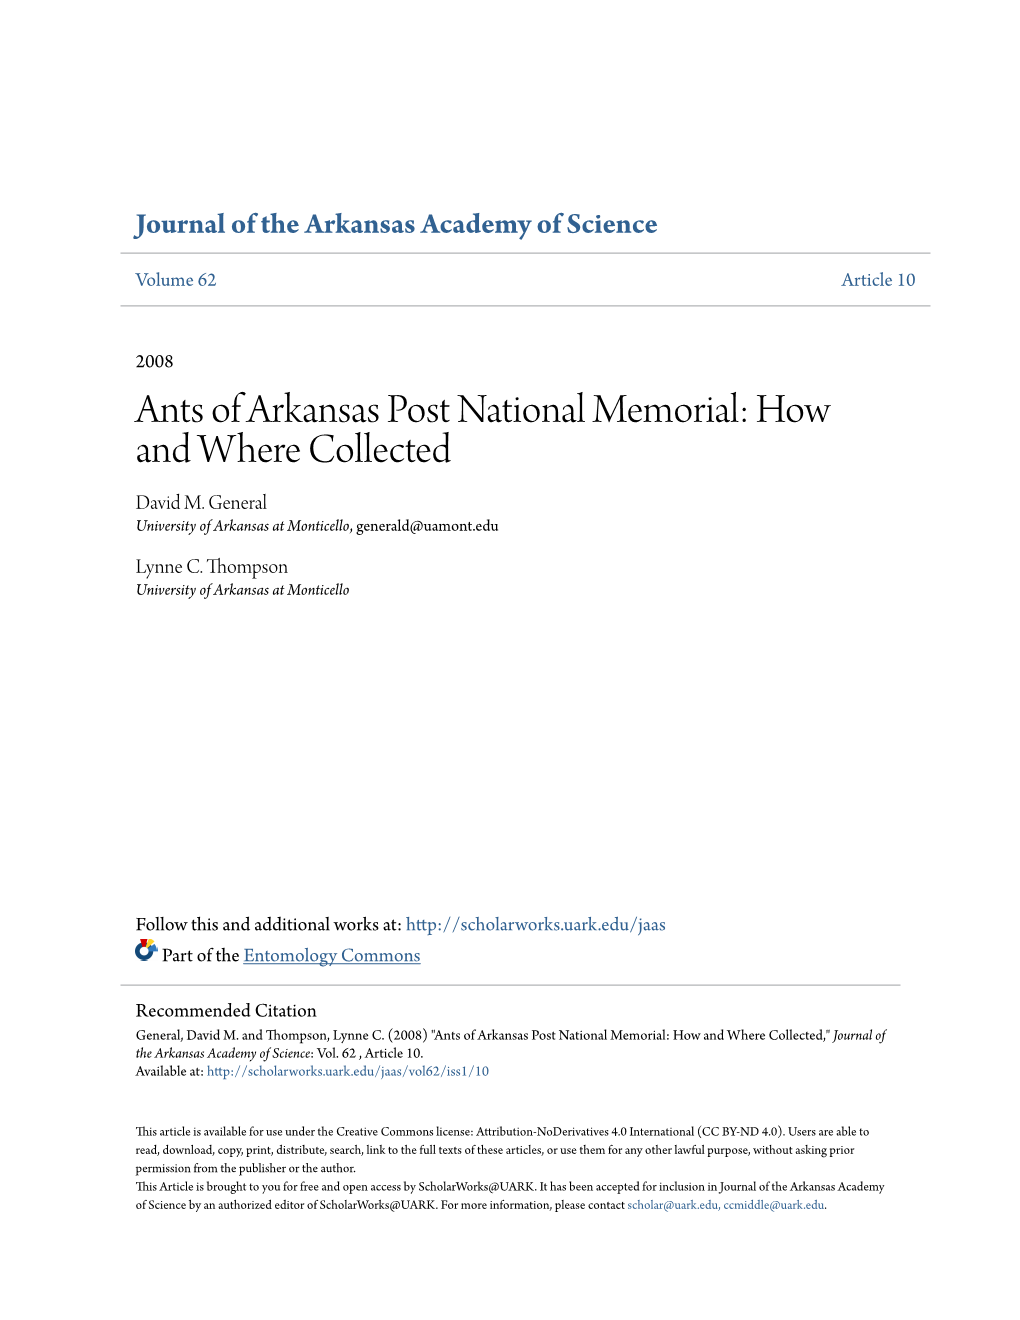 Ants of Arkansas Post National Memorial: How and Where Collected David M